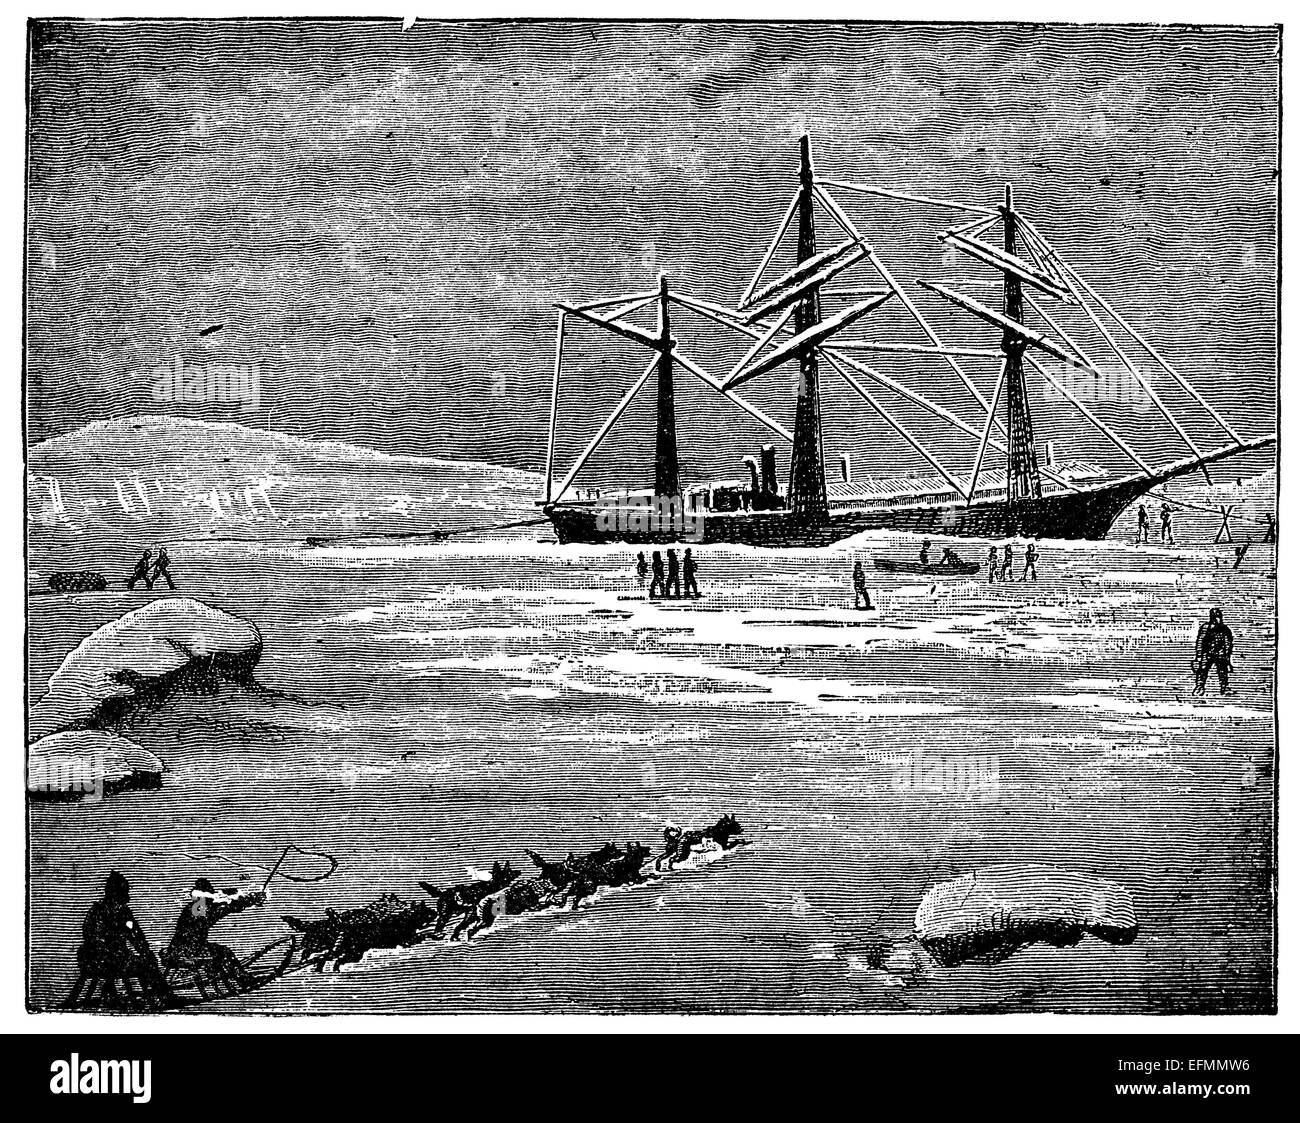 19th century engraving of a ship and explorers in the arctic with a dogsled team Stock Photo